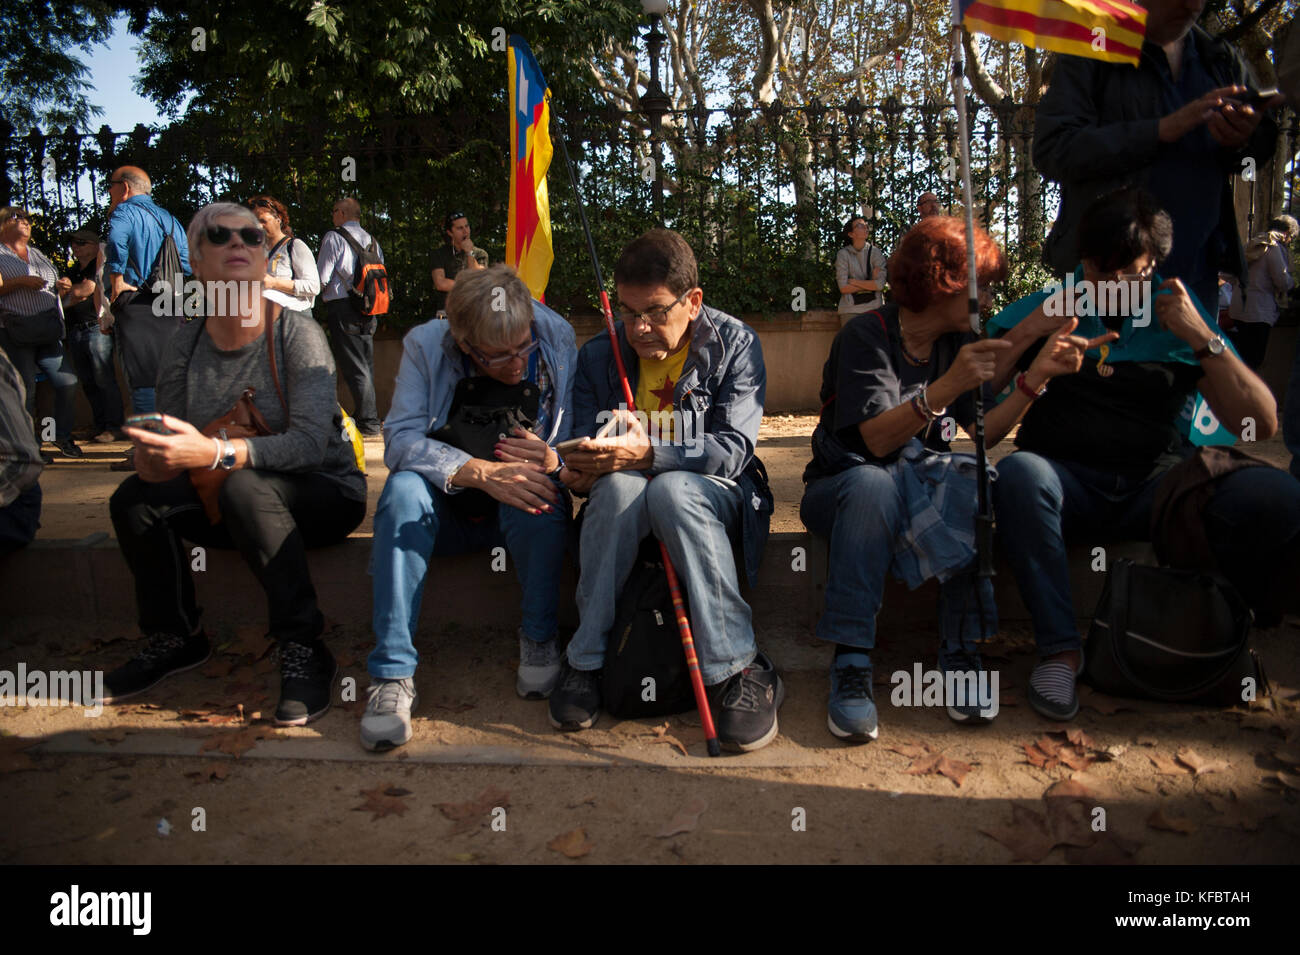 Barcelona, Catalonia. October 27, 2017. Everyone concentrated at the gates of the Catalan Parliament listen to the radio to know in real time the latest news on the motions presented for the possible unilateral declaration of independence. Credit: Charlie Perez/Alamy live News Stock Photo